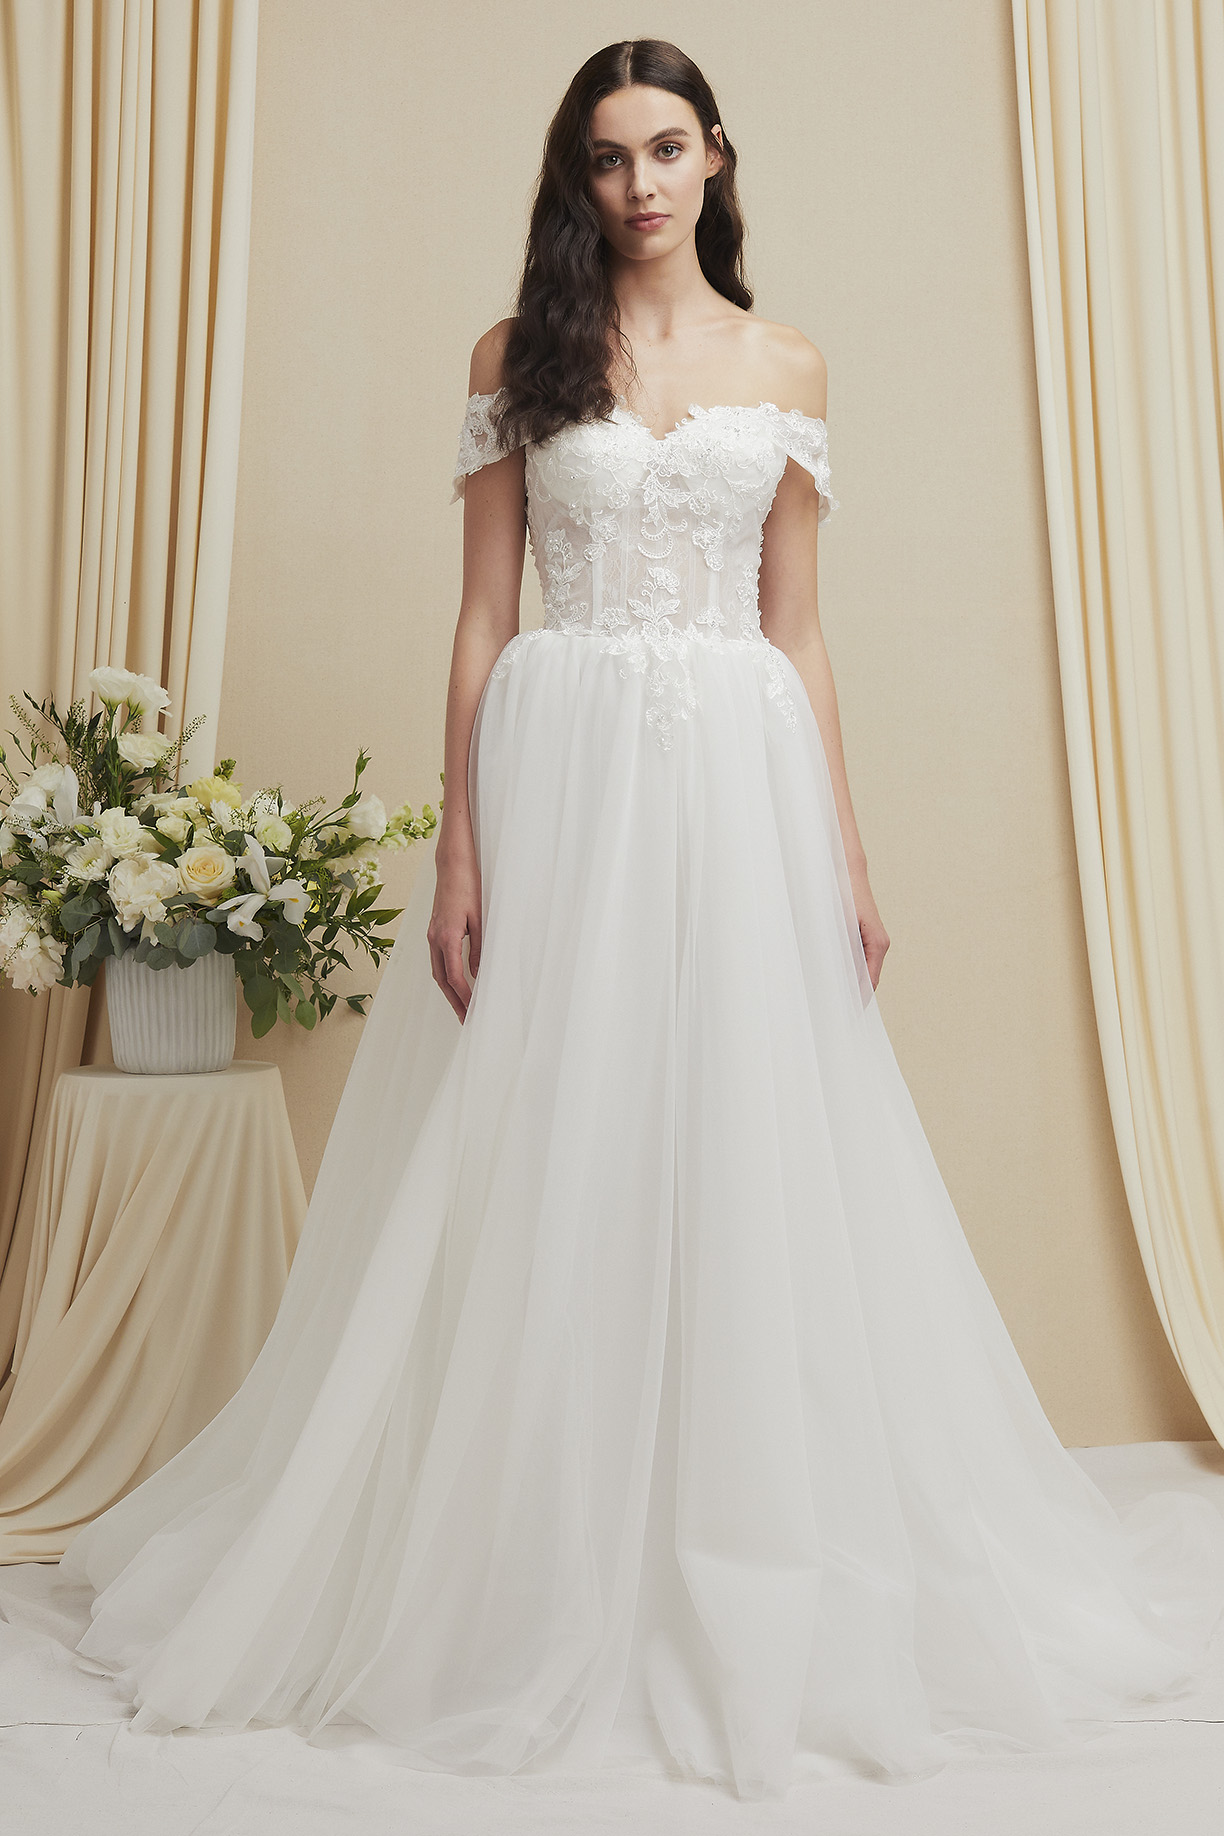 OFF-SHOULDER, SWEETHEART, BALLGOWN, LACE UP BACK, TAIL